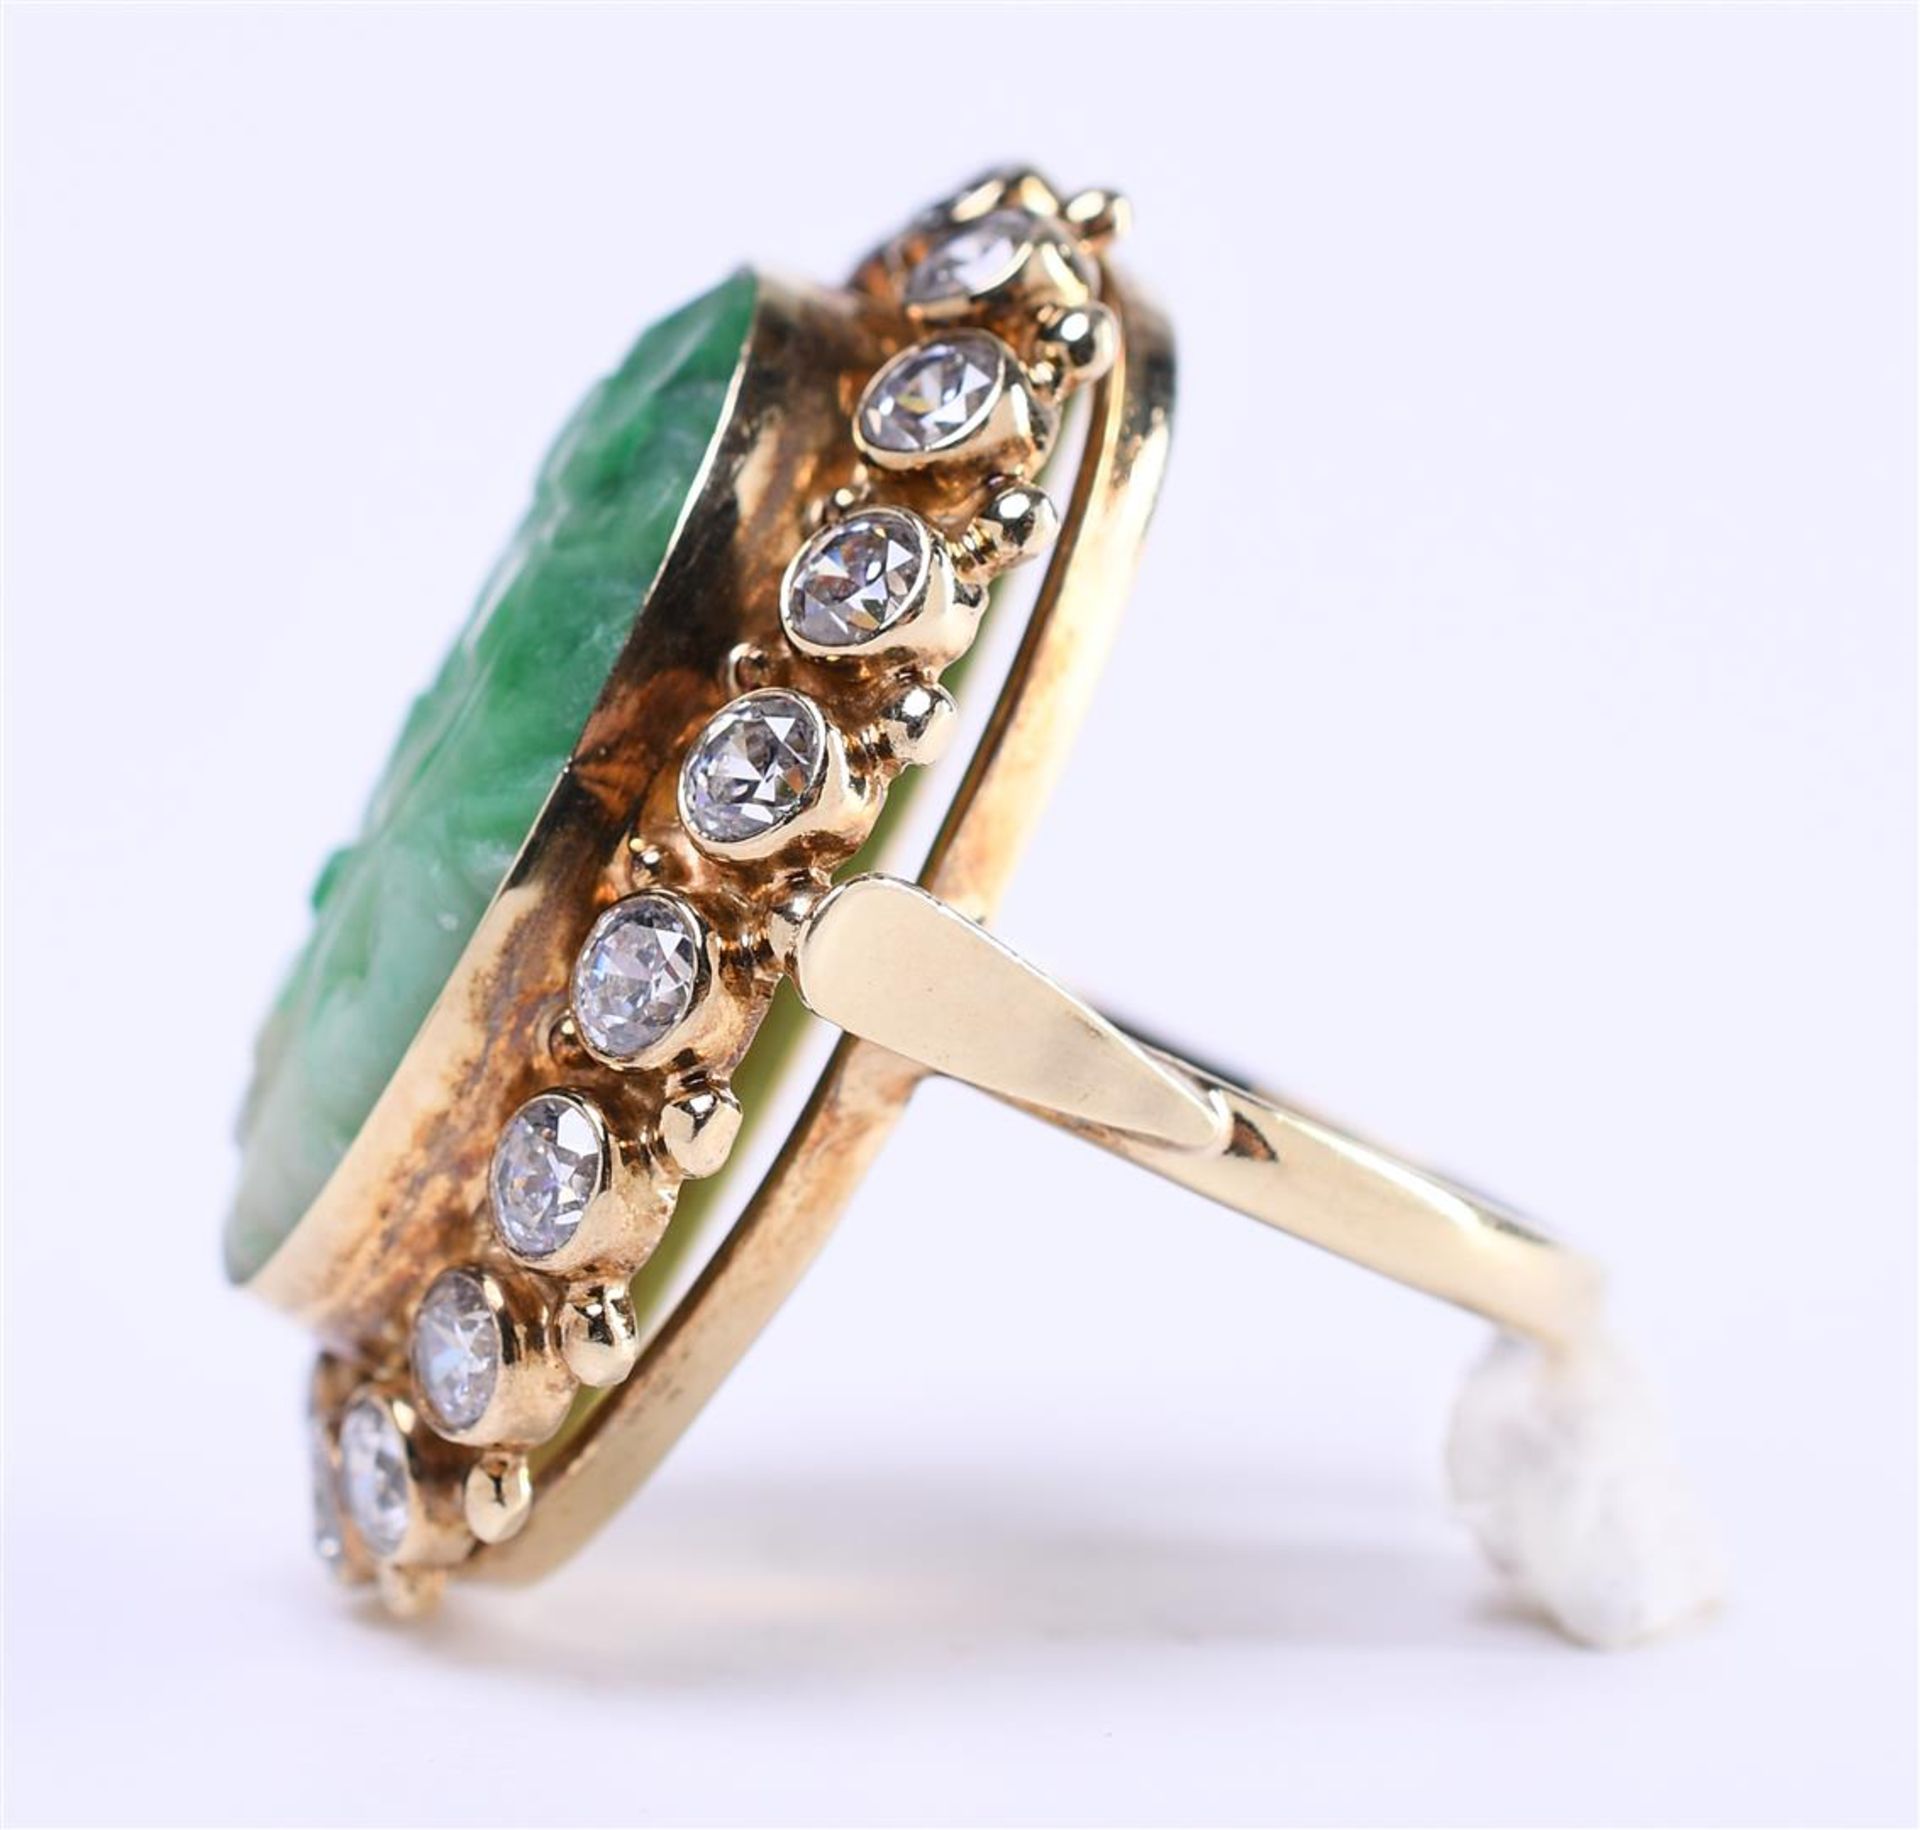 A yellow gold (14 kt) women's ring set with carved jade in the shape of flowers - Image 10 of 10